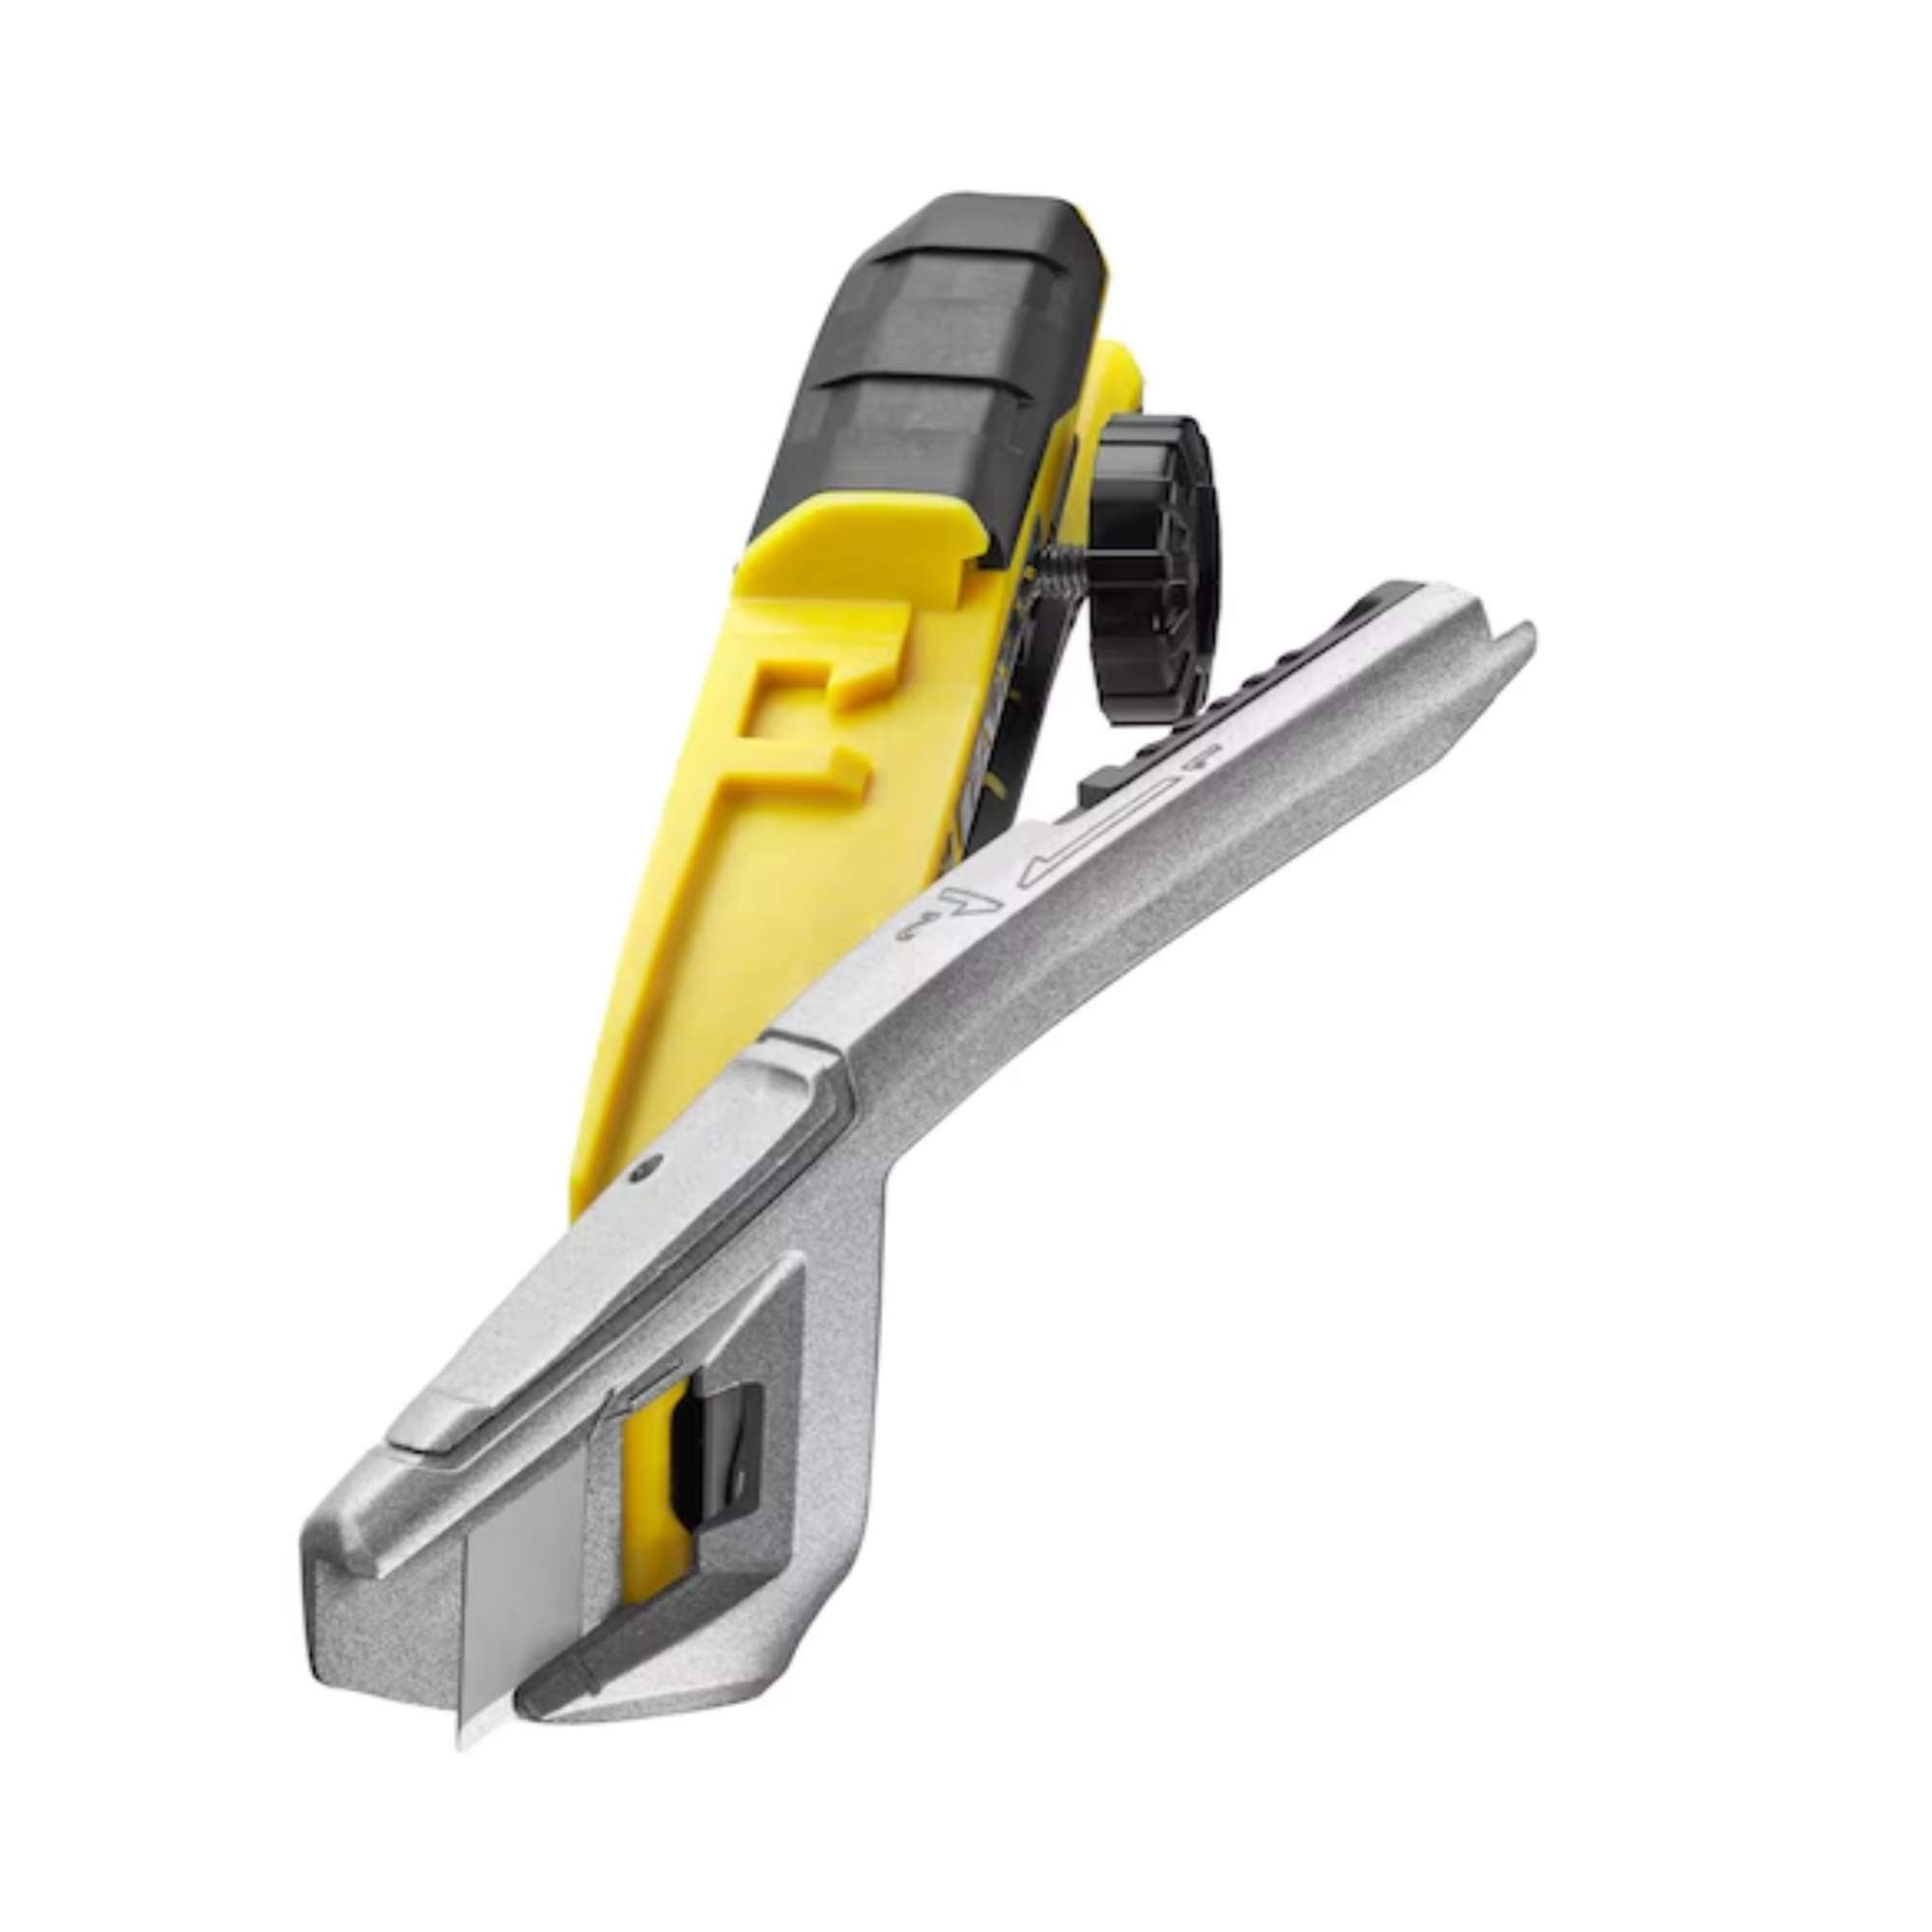 FatMax cutter with wheel and 18mm blade breaker system - Stanley FMHT105920